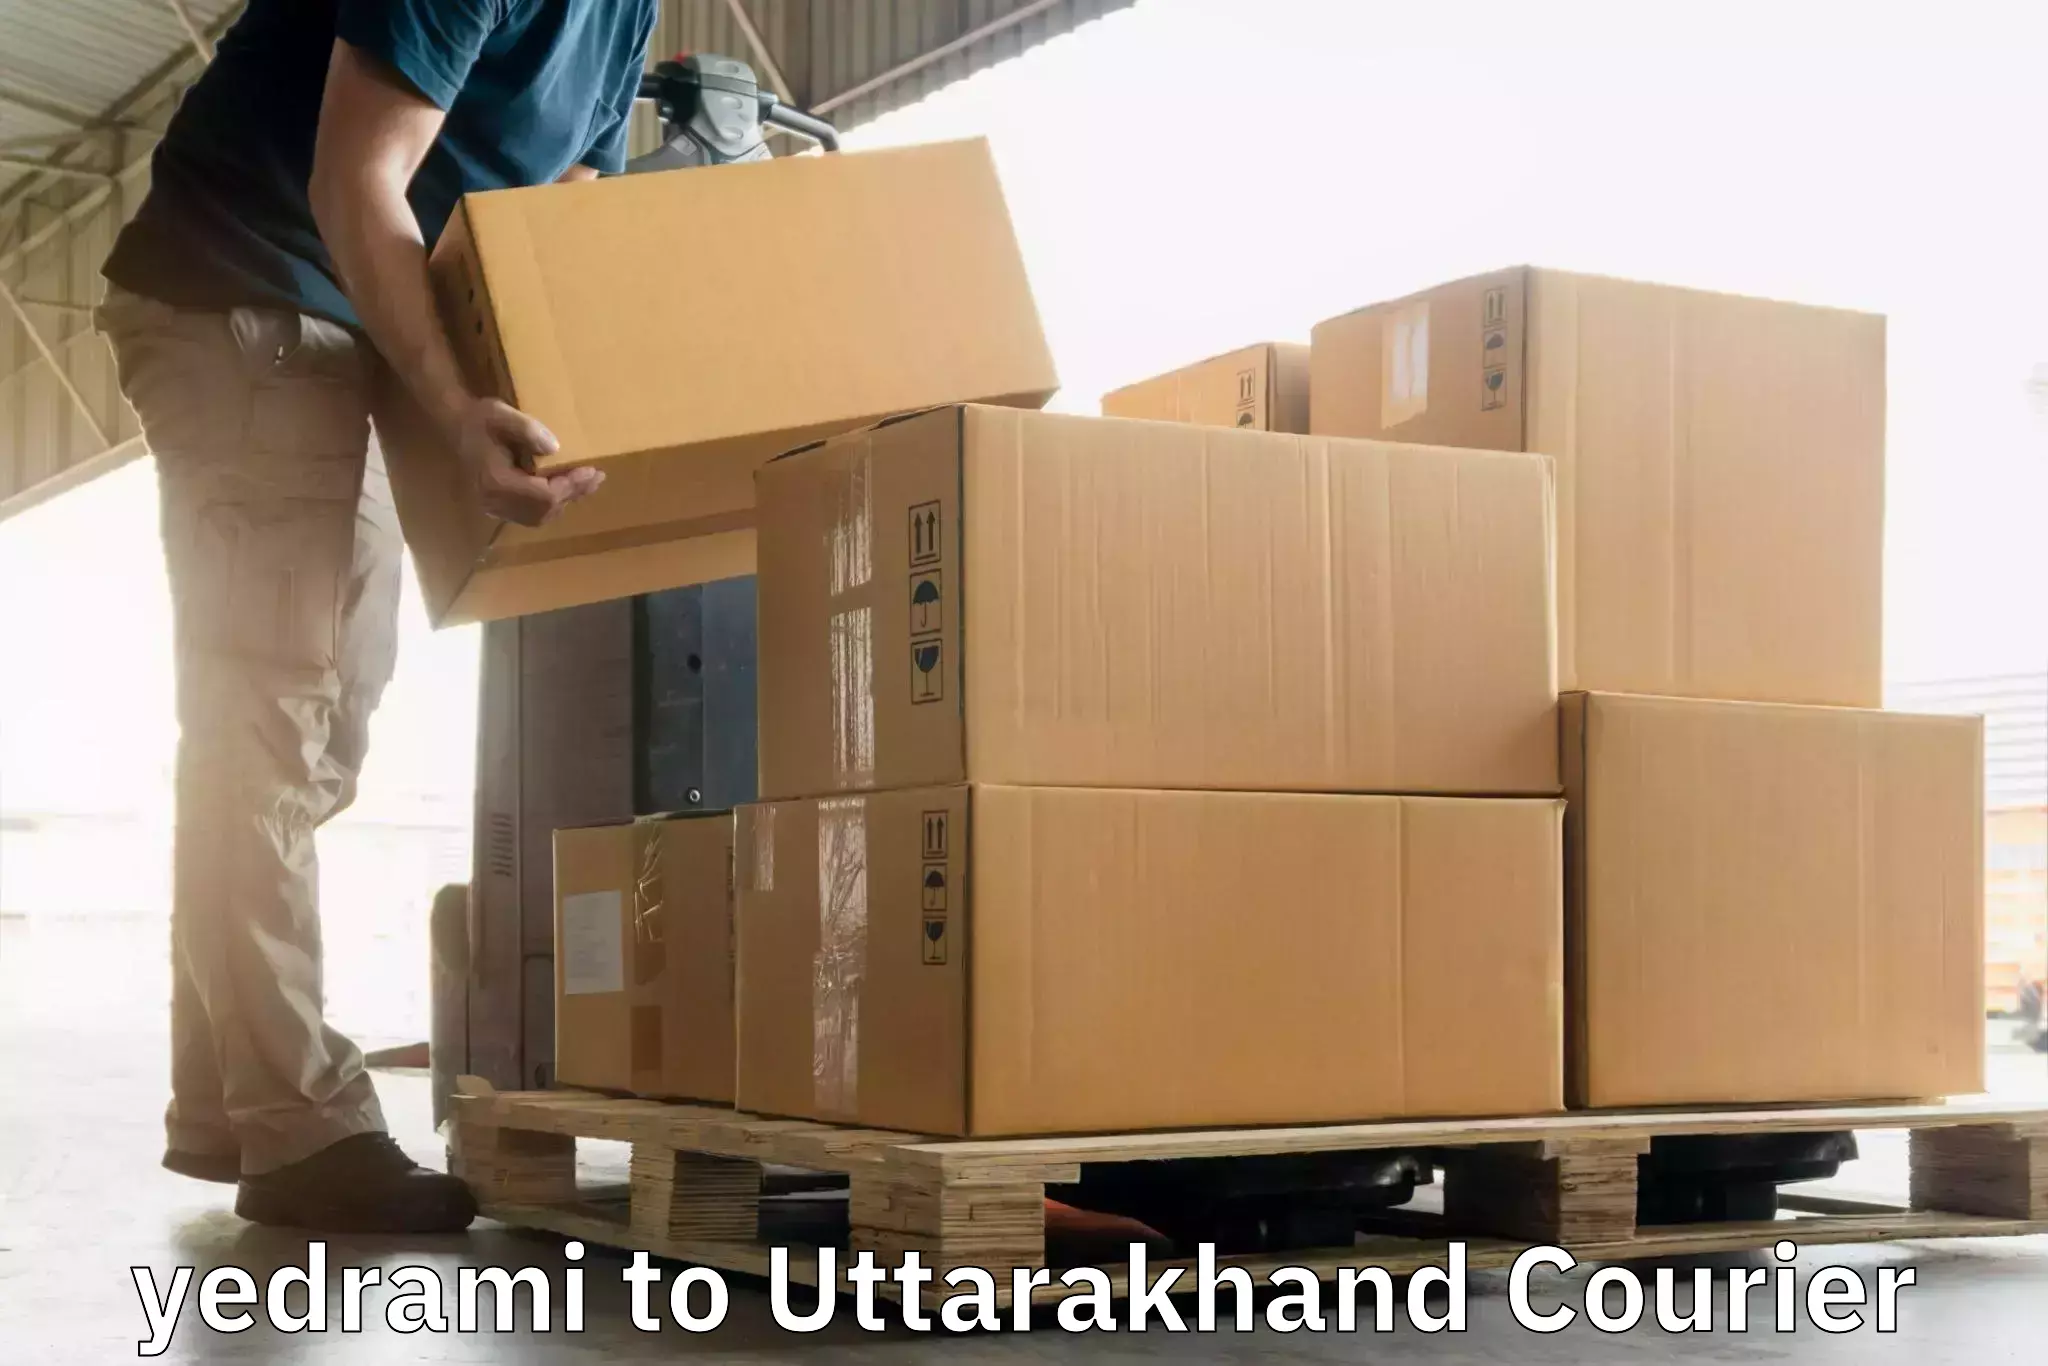 Affordable parcel service yedrami to Joshimath